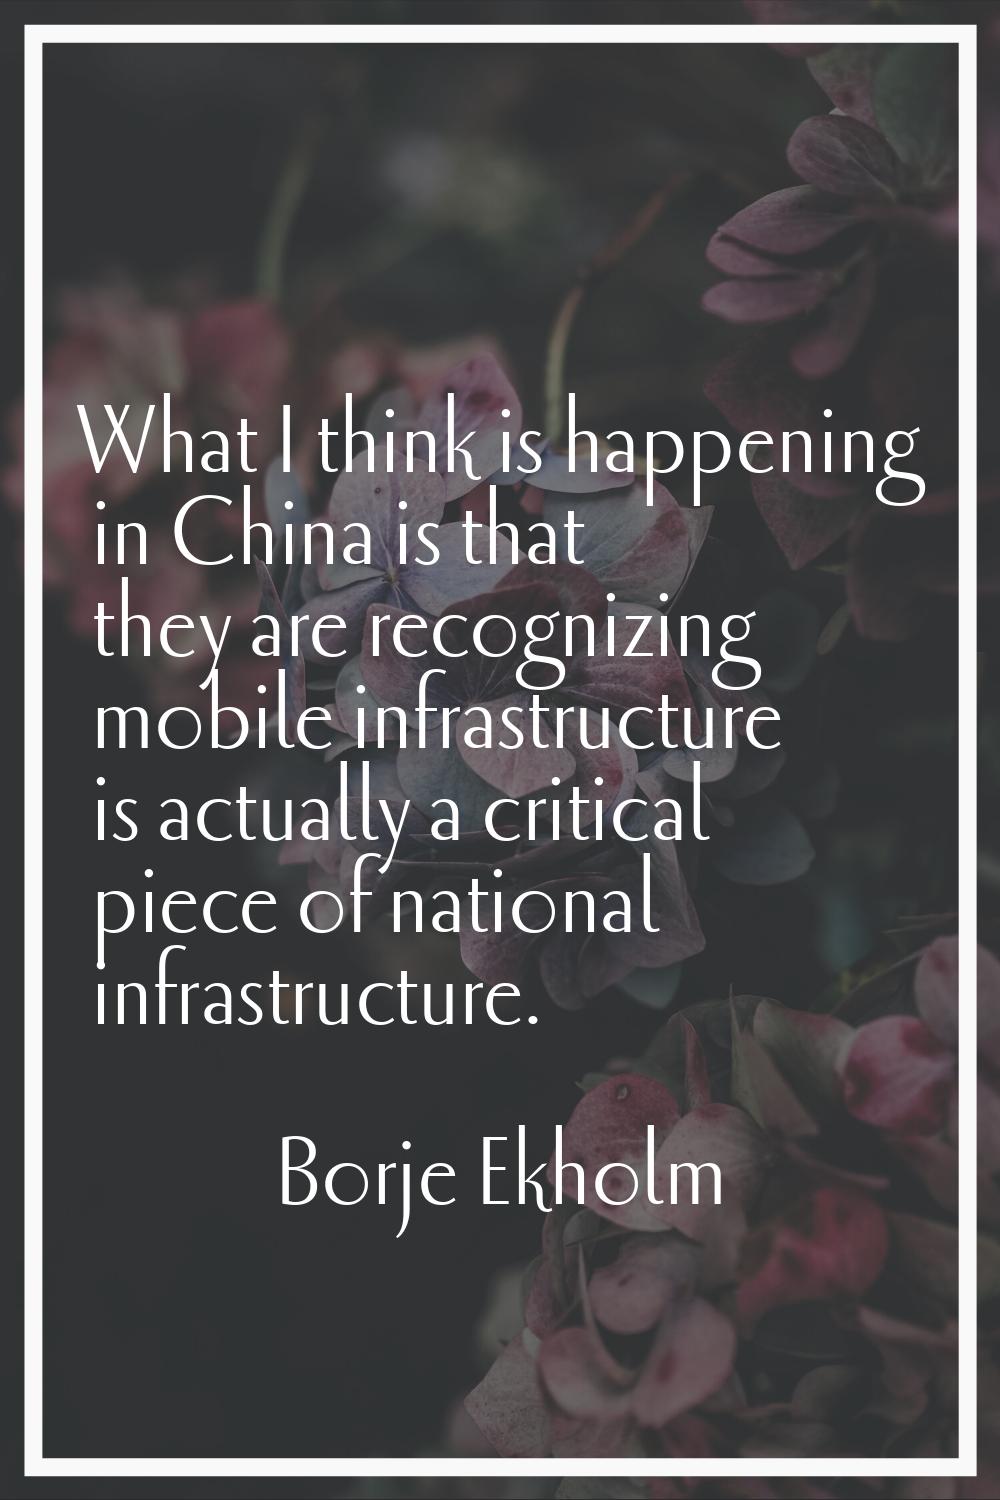 What I think is happening in China is that they are recognizing mobile infrastructure is actually a